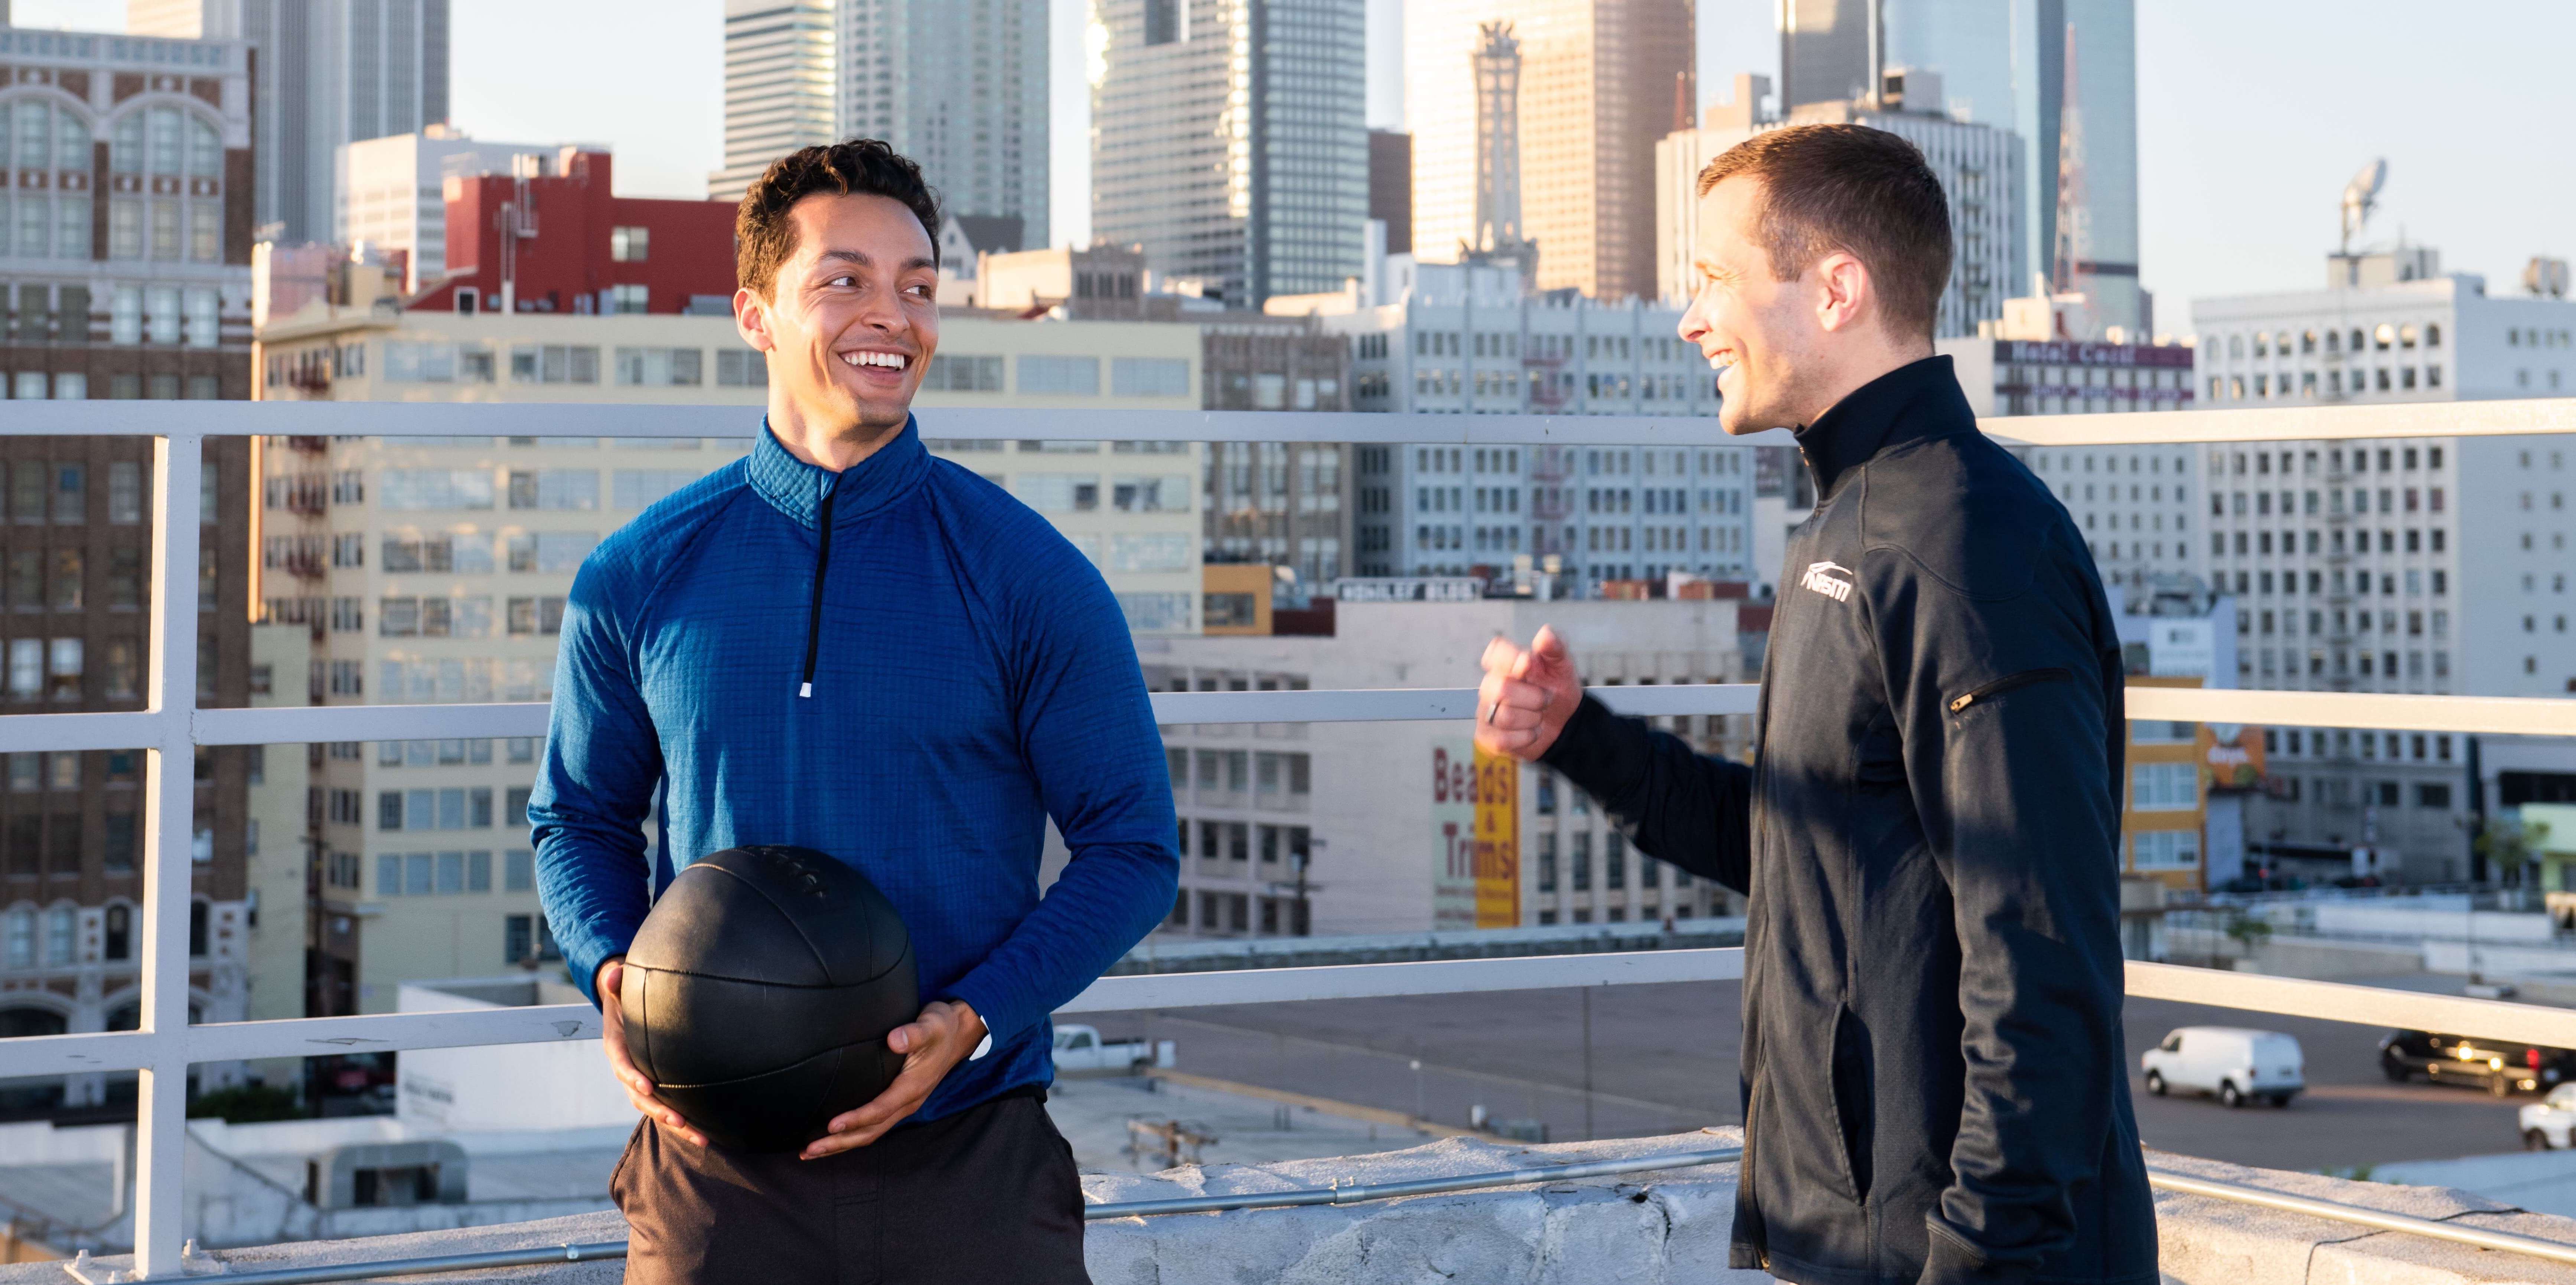 Personal trainer talking to client holding medicine ball